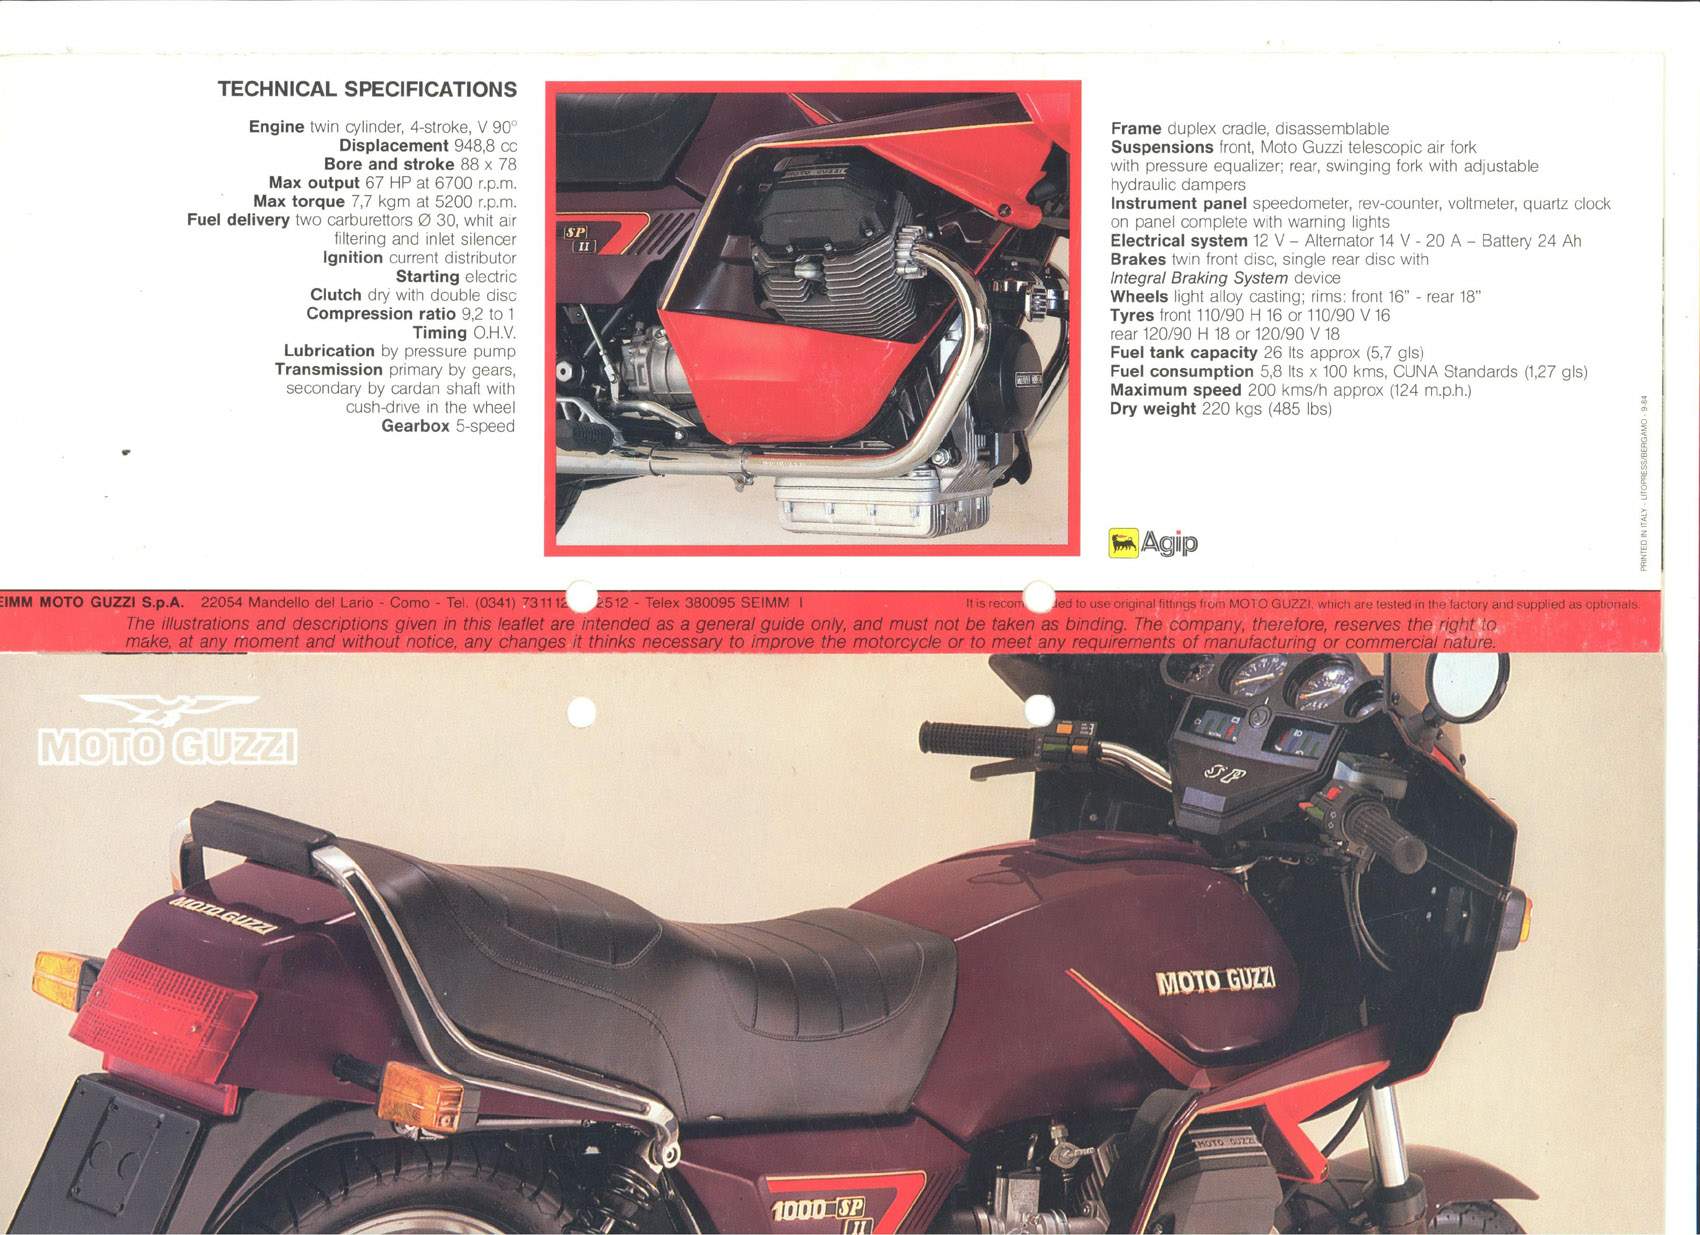 Moto Guzzi 1000SPII Spada For Sale Specifications, Price and Images